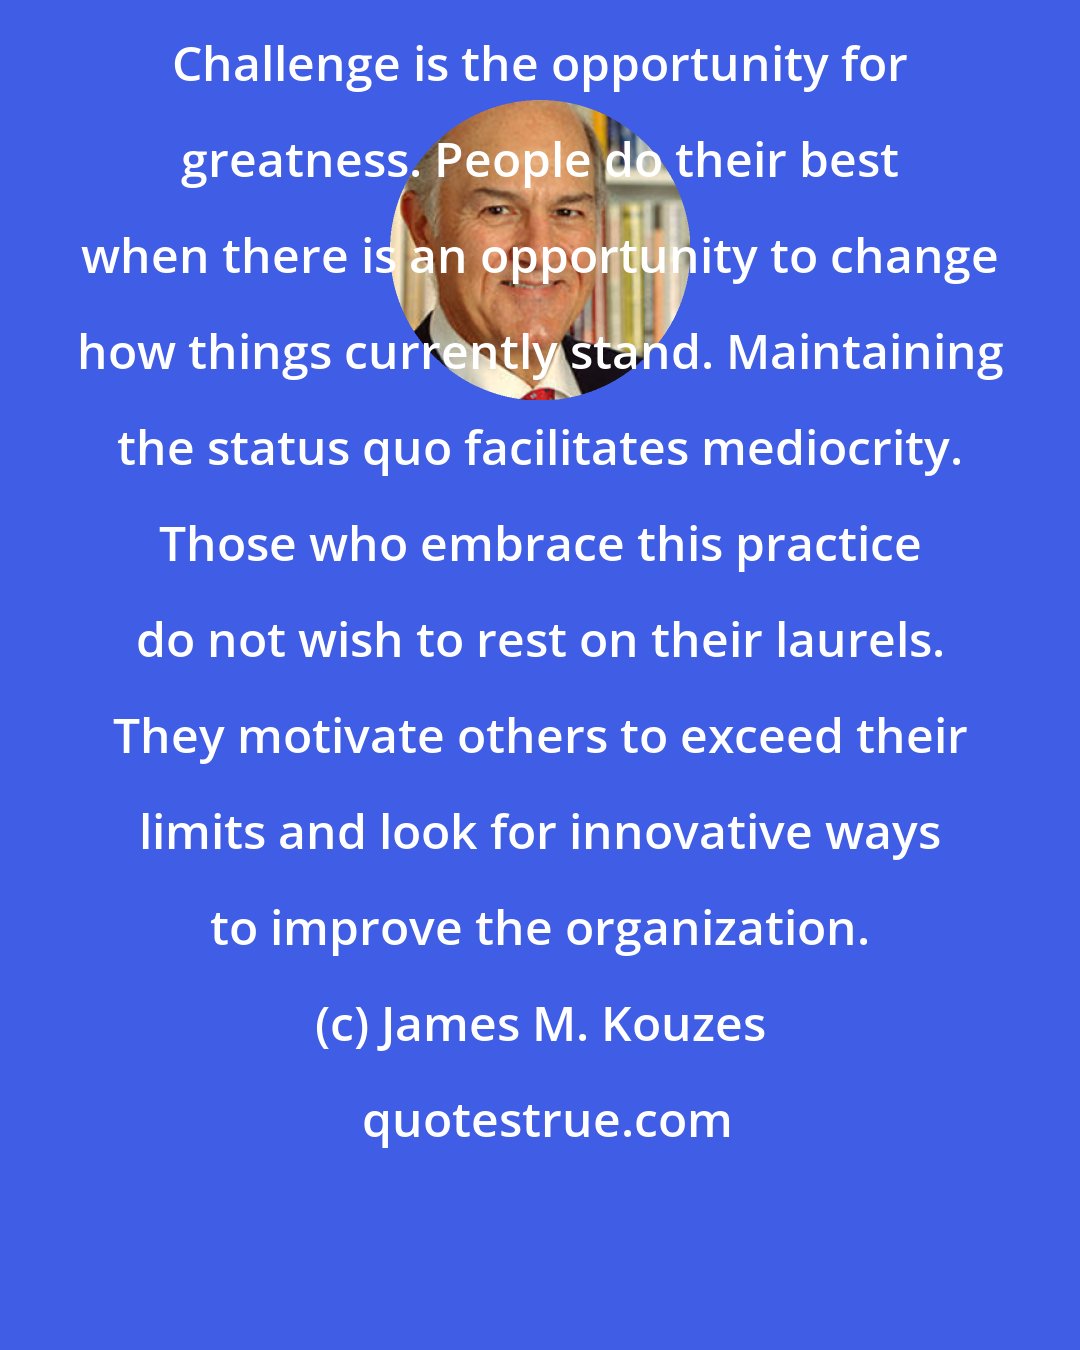 James M. Kouzes: Challenge is the opportunity for greatness. People do their best when there is an opportunity to change how things currently stand. Maintaining the status quo facilitates mediocrity. Those who embrace this practice do not wish to rest on their laurels. They motivate others to exceed their limits and look for innovative ways to improve the organization.